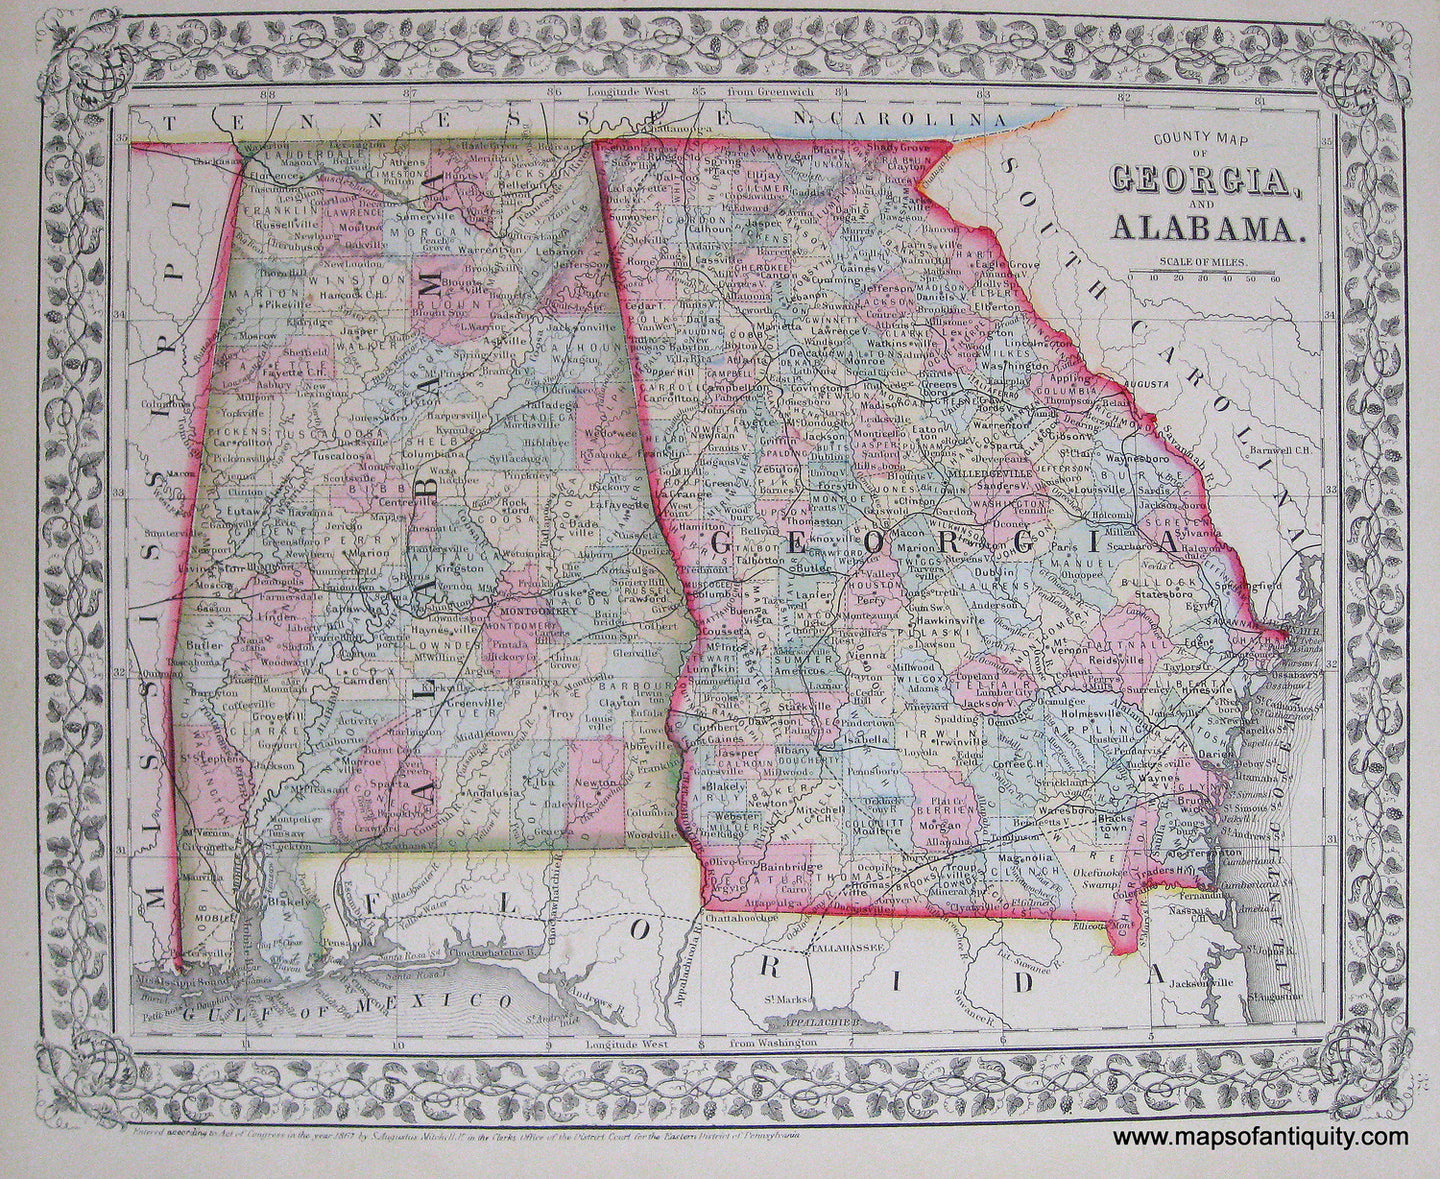 Antique-Hand-Colored-Map-County-Map-of-Georgia-and-Alabama-United-States-South-1867-Mitchell-Maps-Of-Antiquity